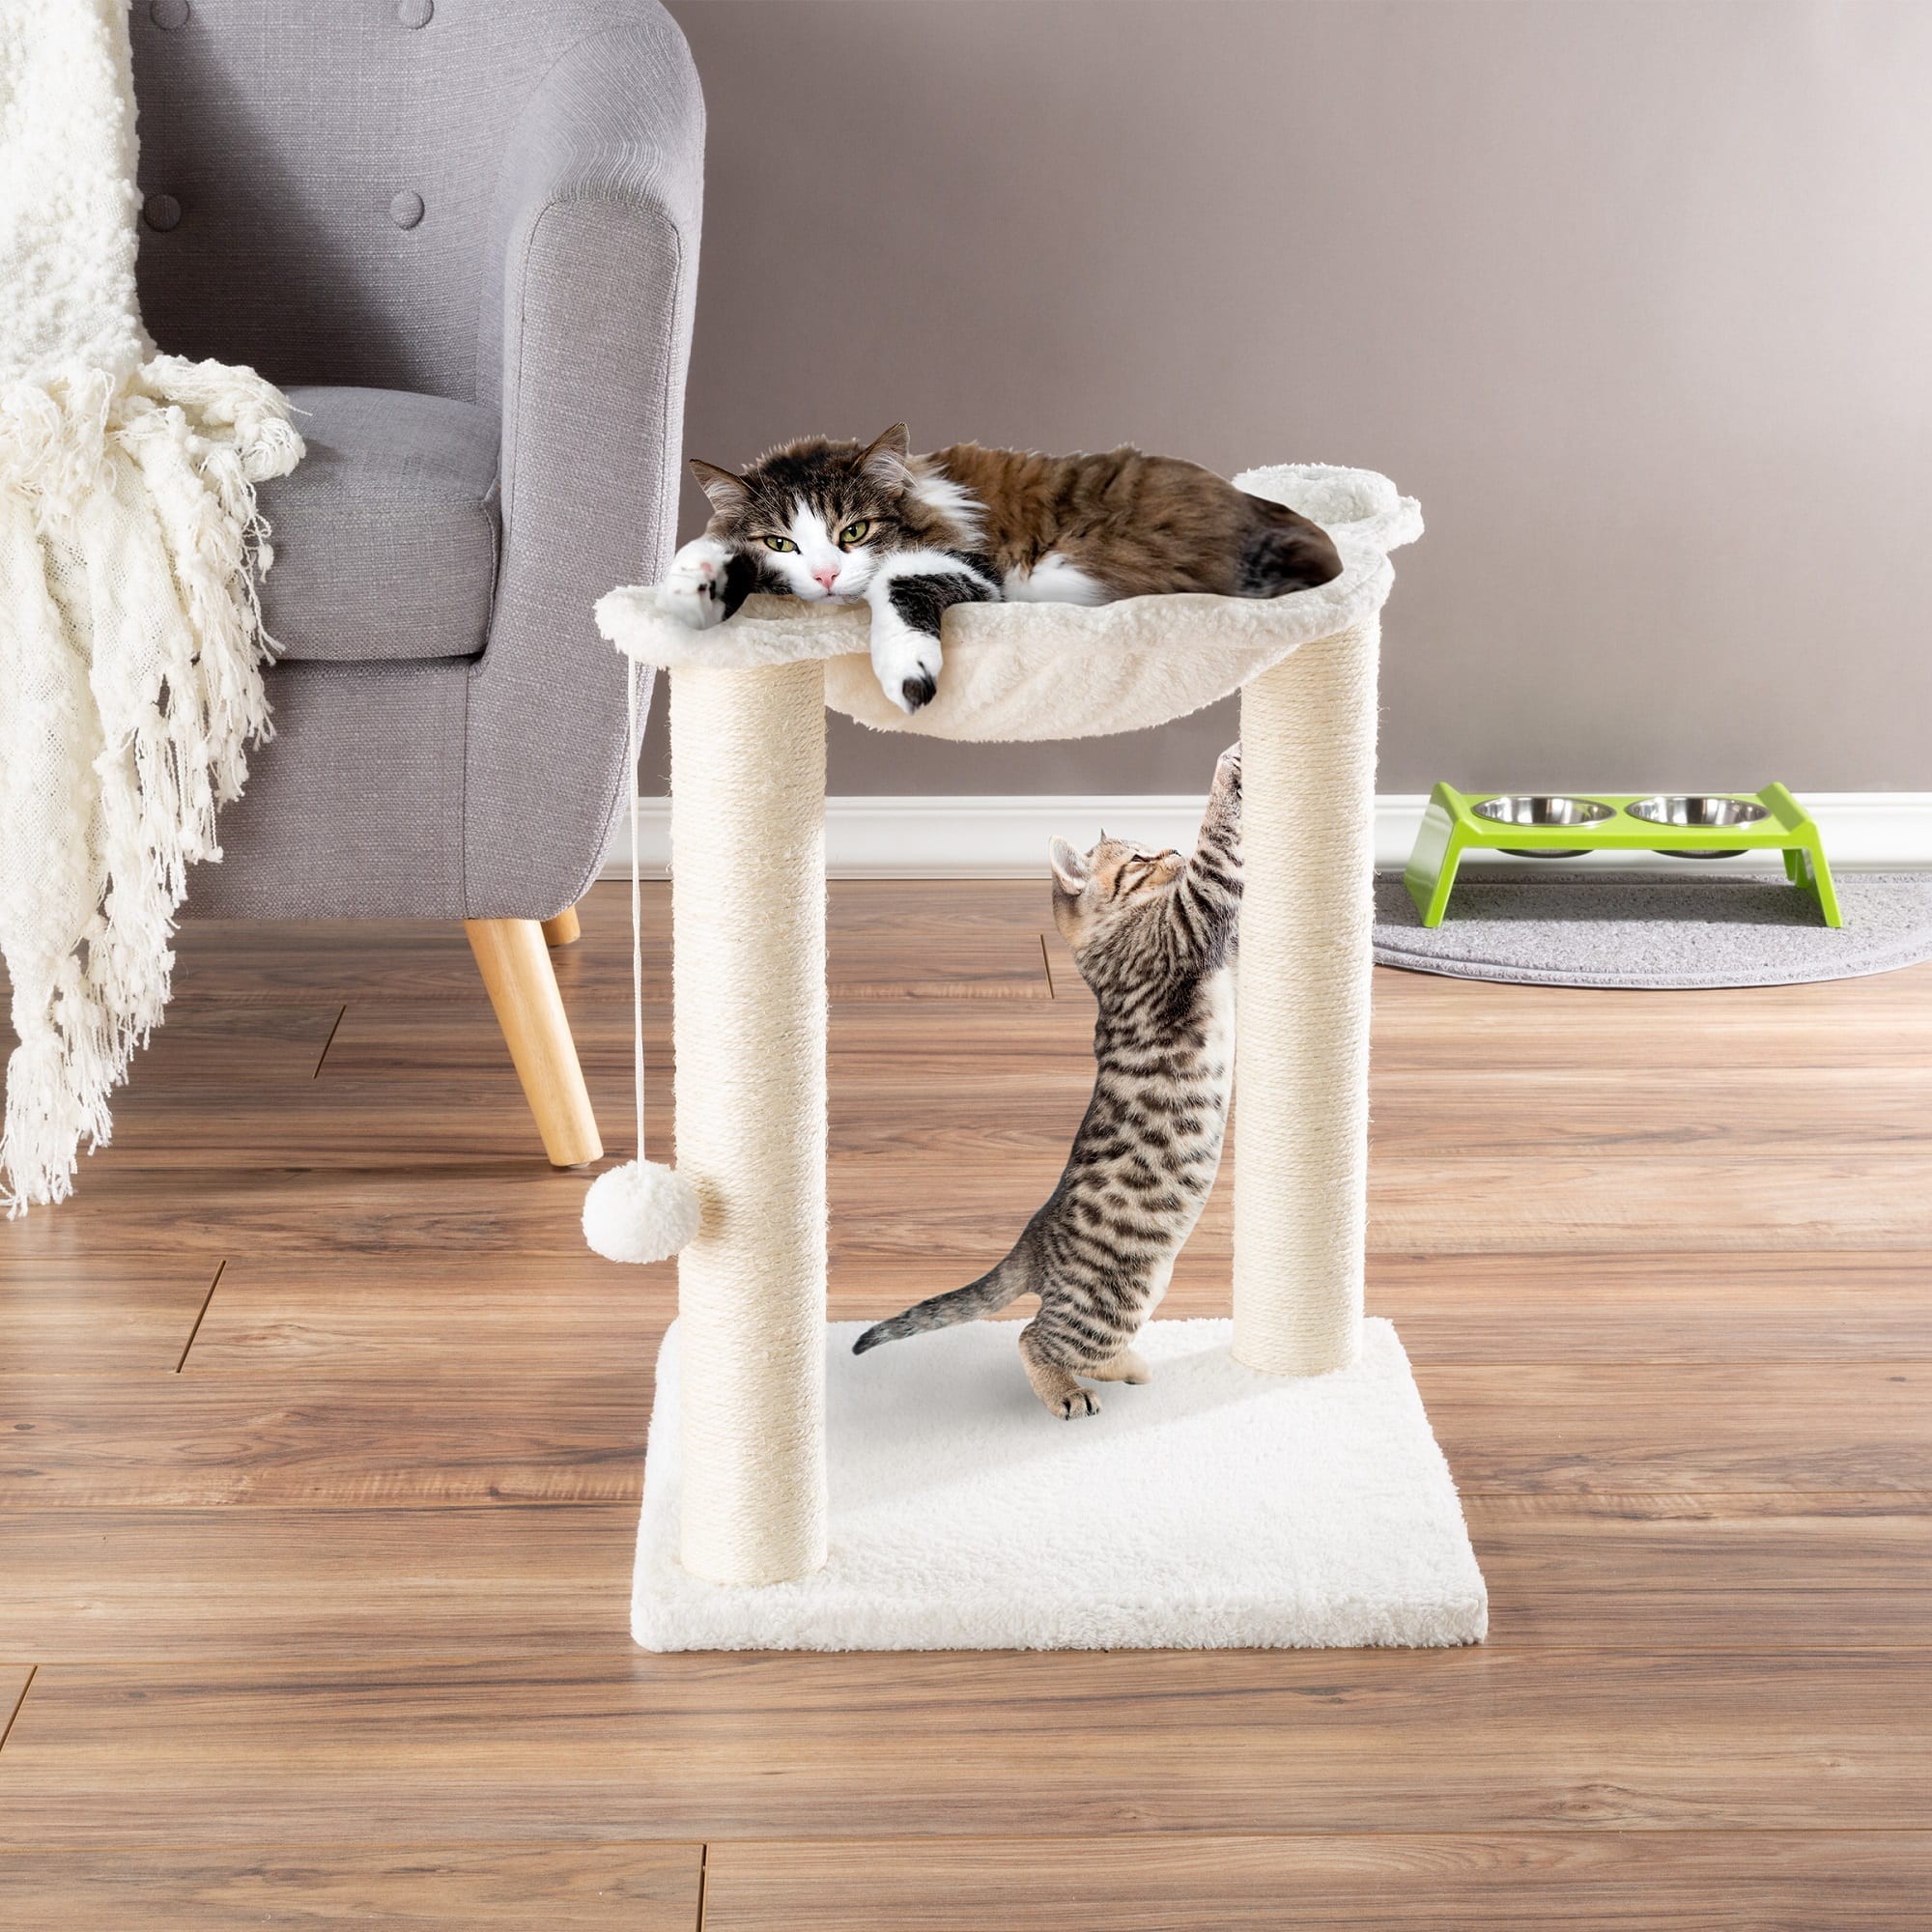 Photos - Other for Cats Petmaker Hammock and Scratcher Cat Tree, 15.75" L X 15.75" W X 19 